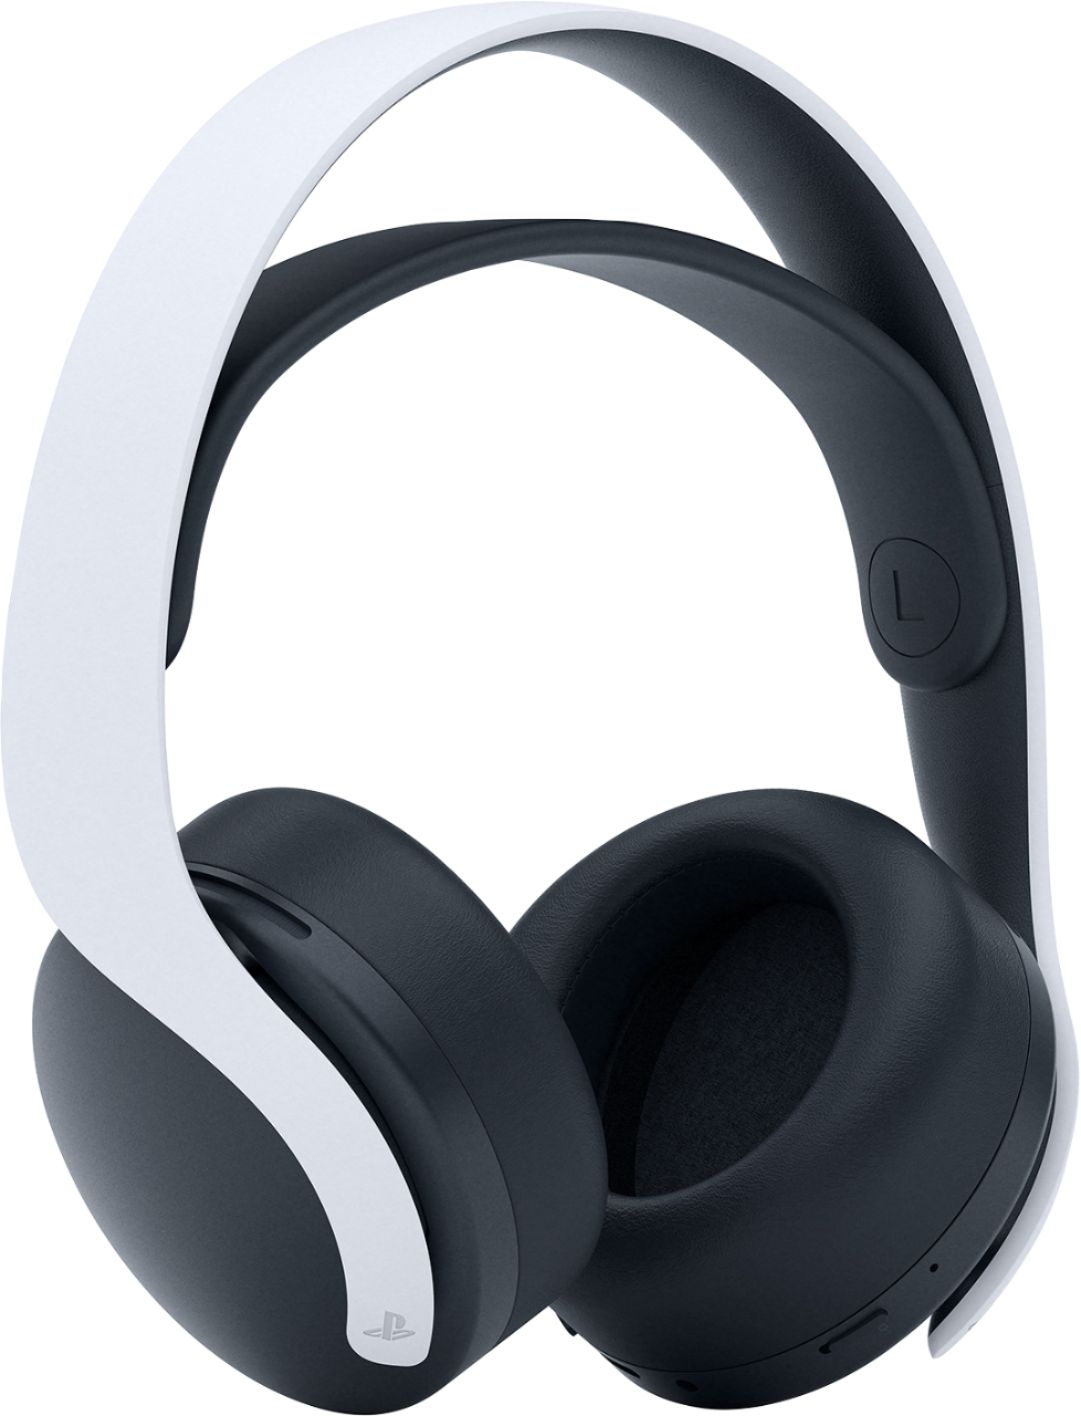 zuur Vernederen Aankondiging Sony PULSE 3D Wireless Headset for PS5, PS4, and PC White 3005688 - Best Buy